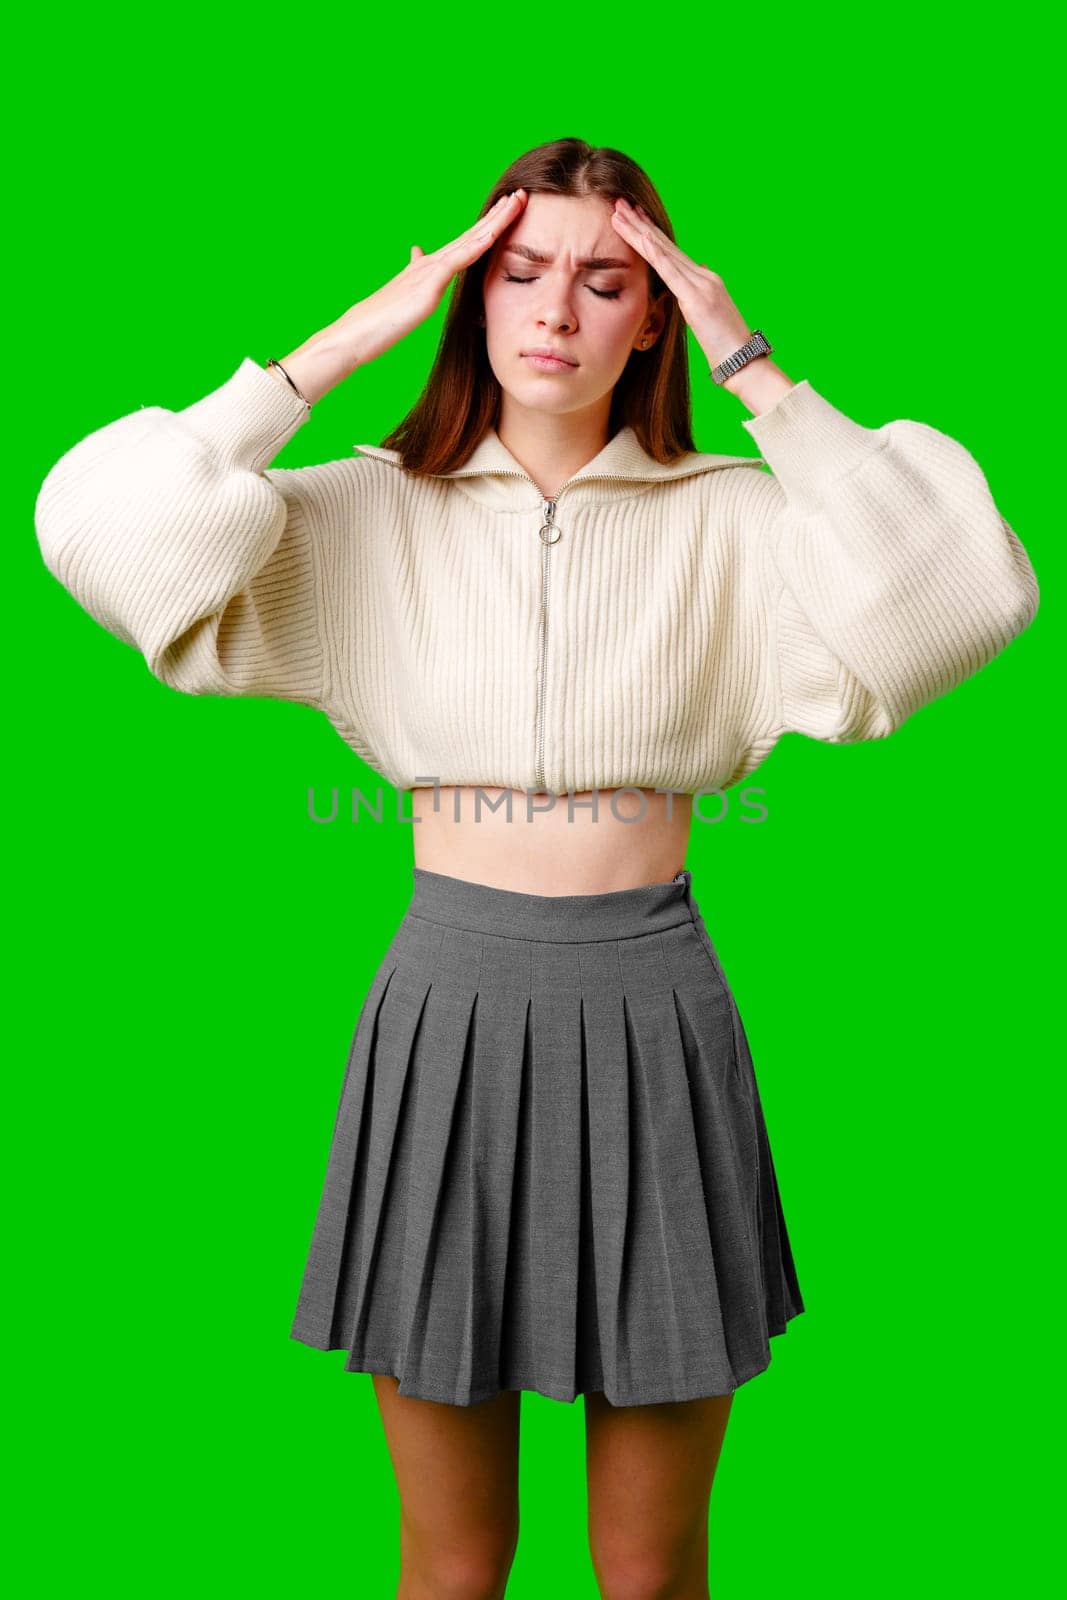 A woman wearing a skirt is shown holding her hands to her head in a gesture of distress or frustration. She appears to be deep in thought or experiencing a moment of intense emotion.